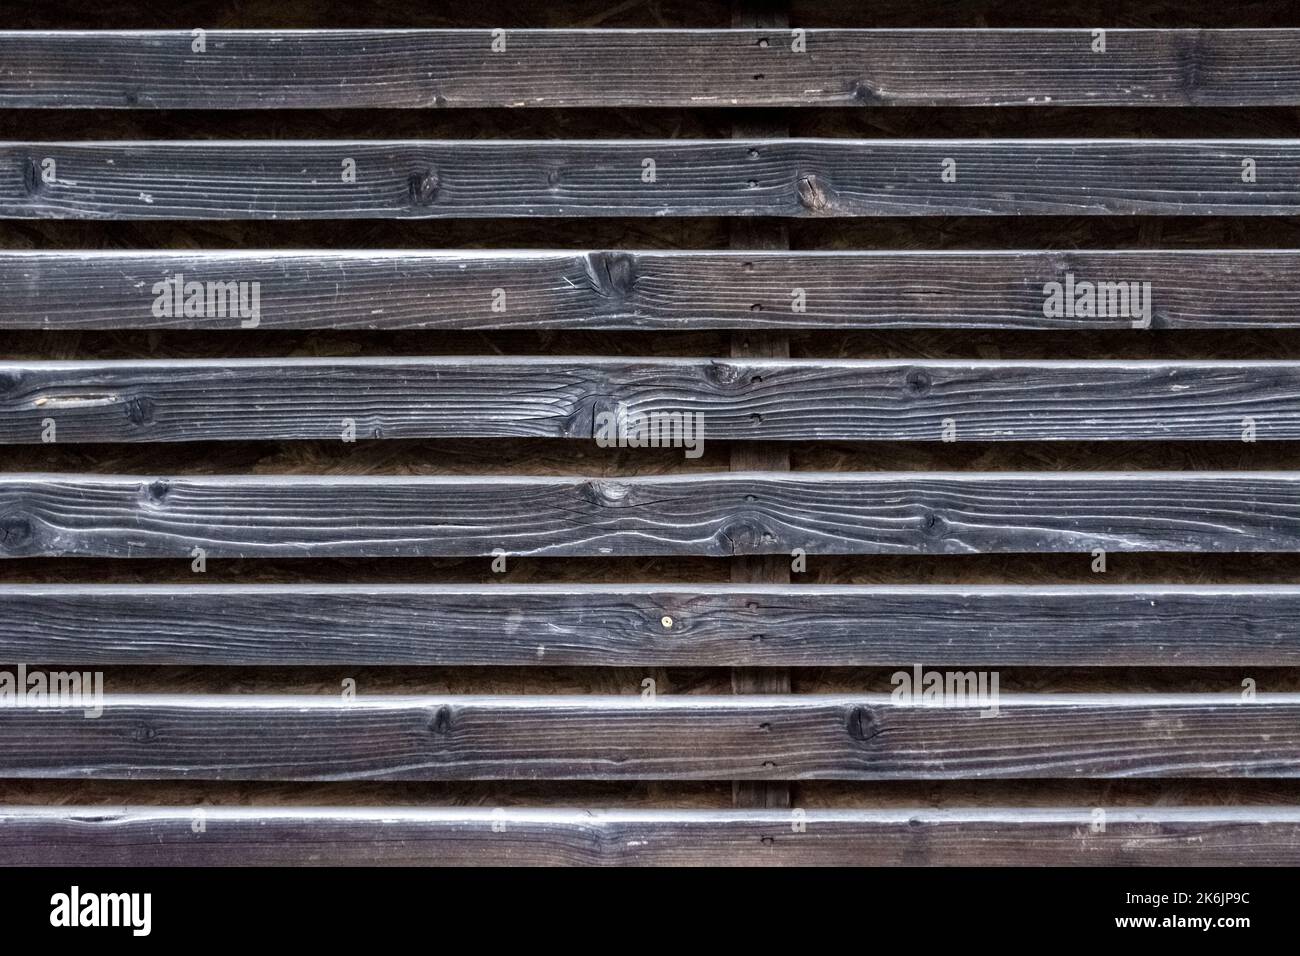 Fragment of a wall made of old wooden weathered slats. For use as an abstract background. Stock Photo